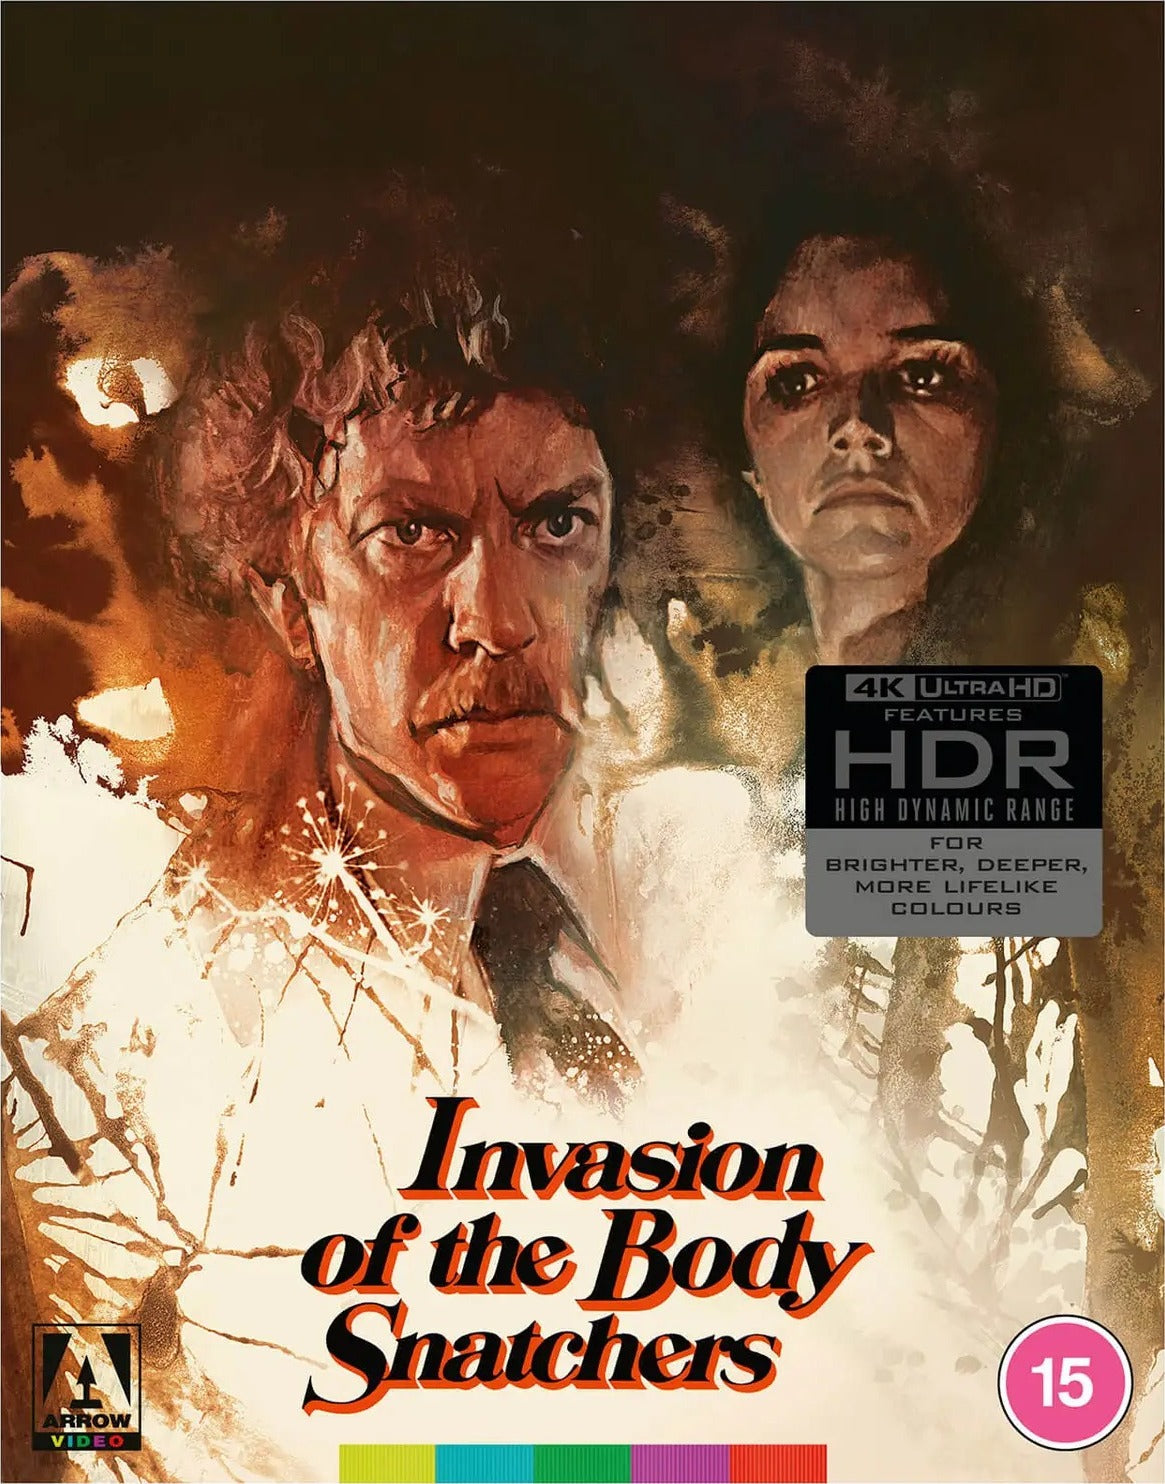 INVASION OF THE BODY SNATCHERS (REGION FREE IMPORT - LIMITED EDITION) 4K UHD